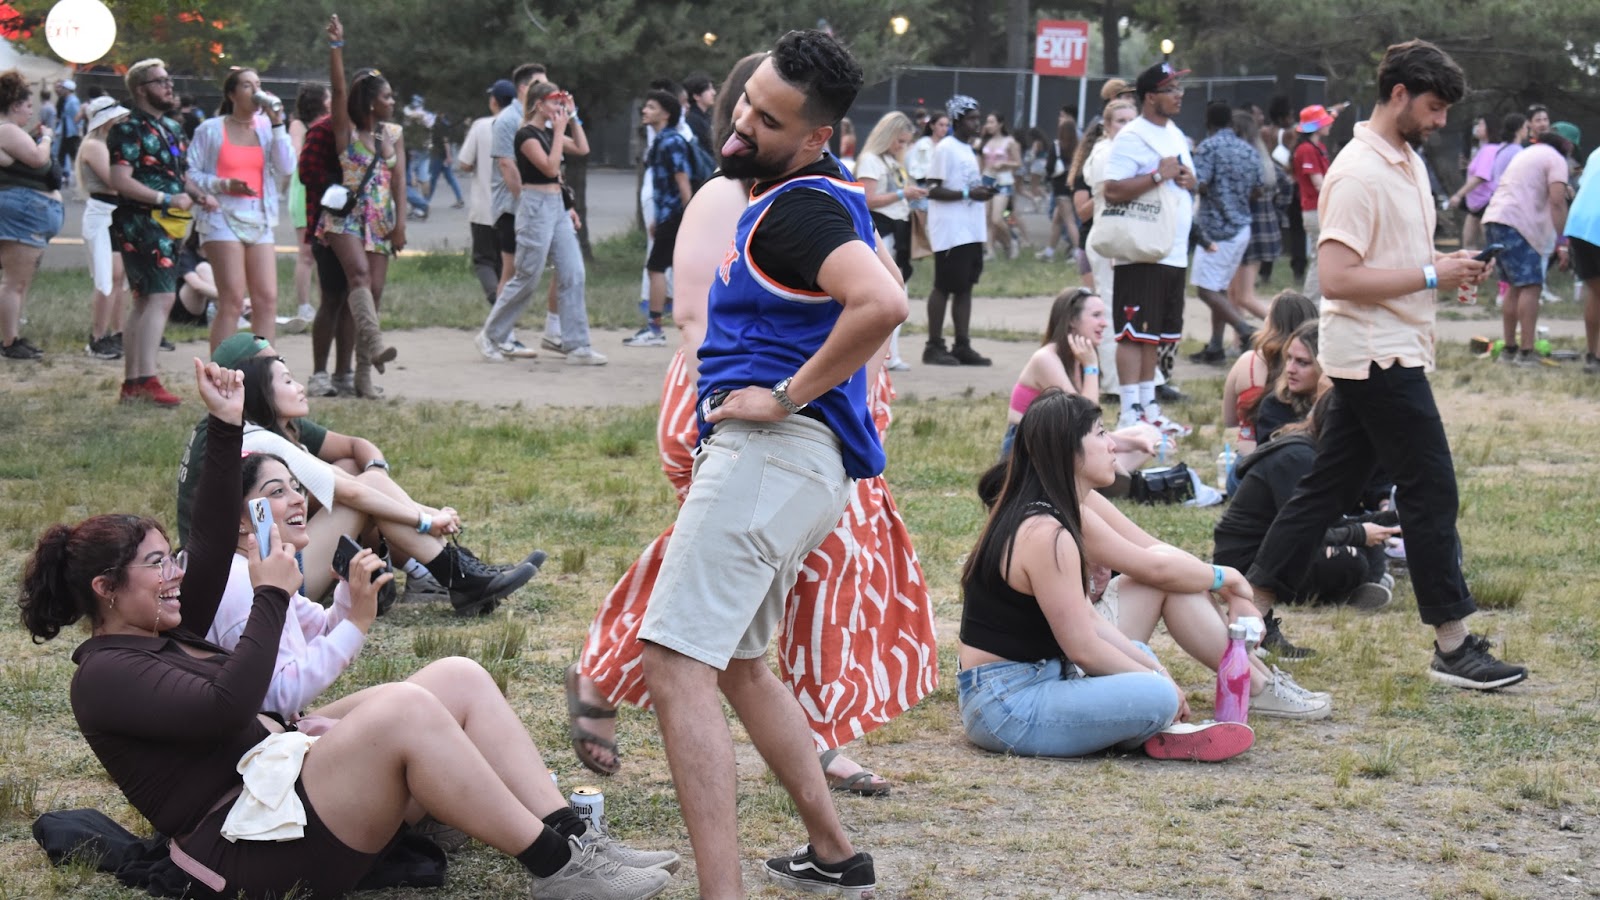 A man dressed in a blue jersey and khaki shorts dancing in front of his friends in the middle of Flushing Meadows Corona Park 